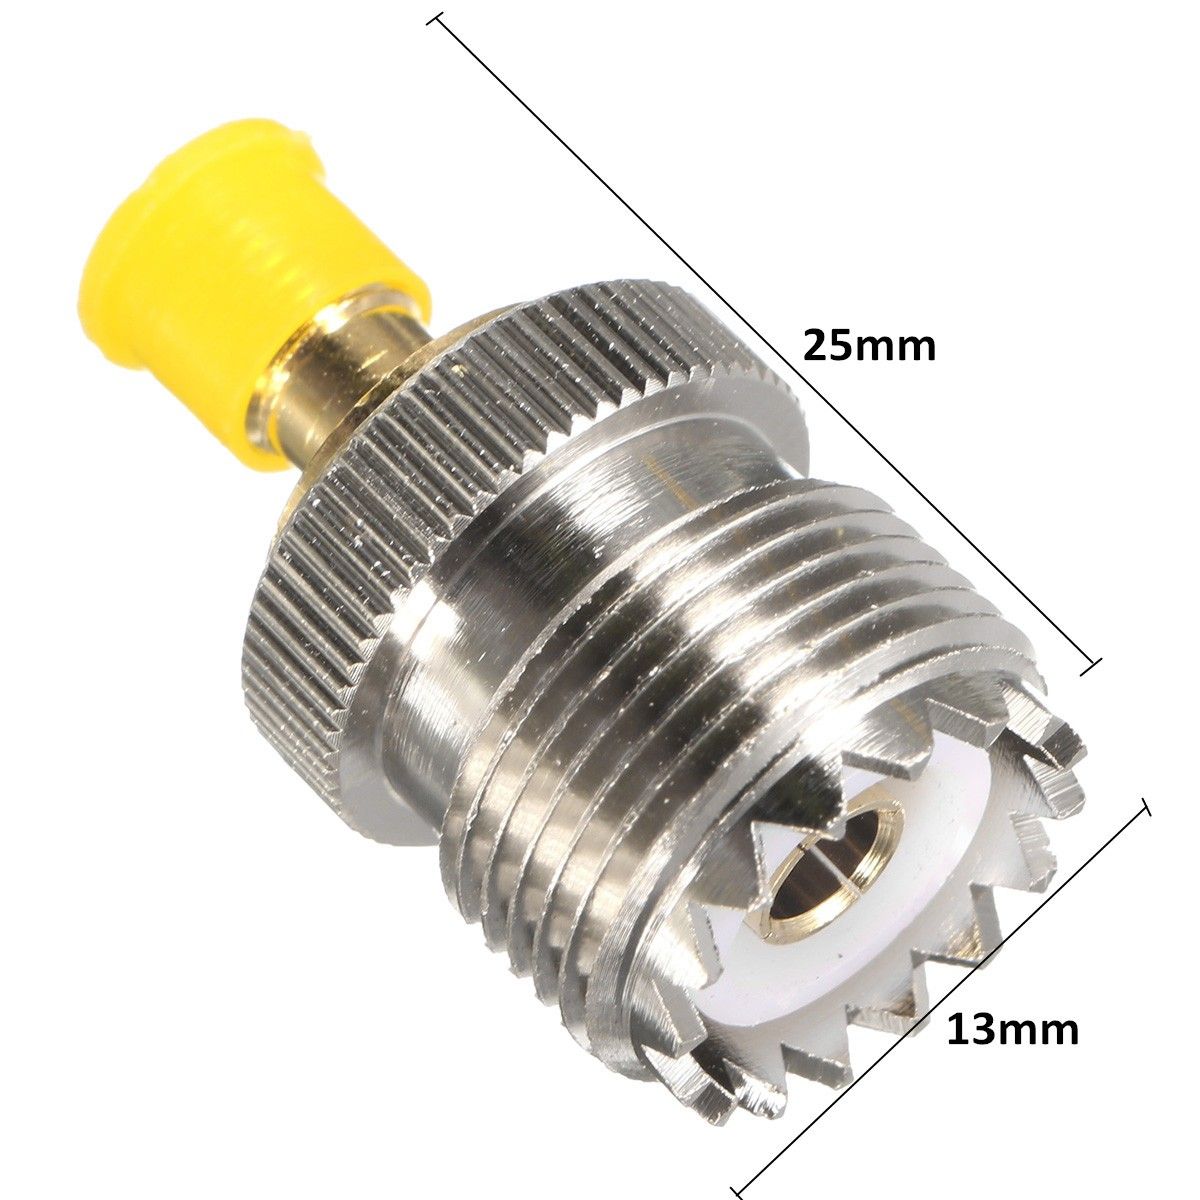 Antenna-Adaptor-S021A-SMA-F-to-UHF-F-SO239-for-BAOFENG-UV-5R-PX-777-PX-888-1069647